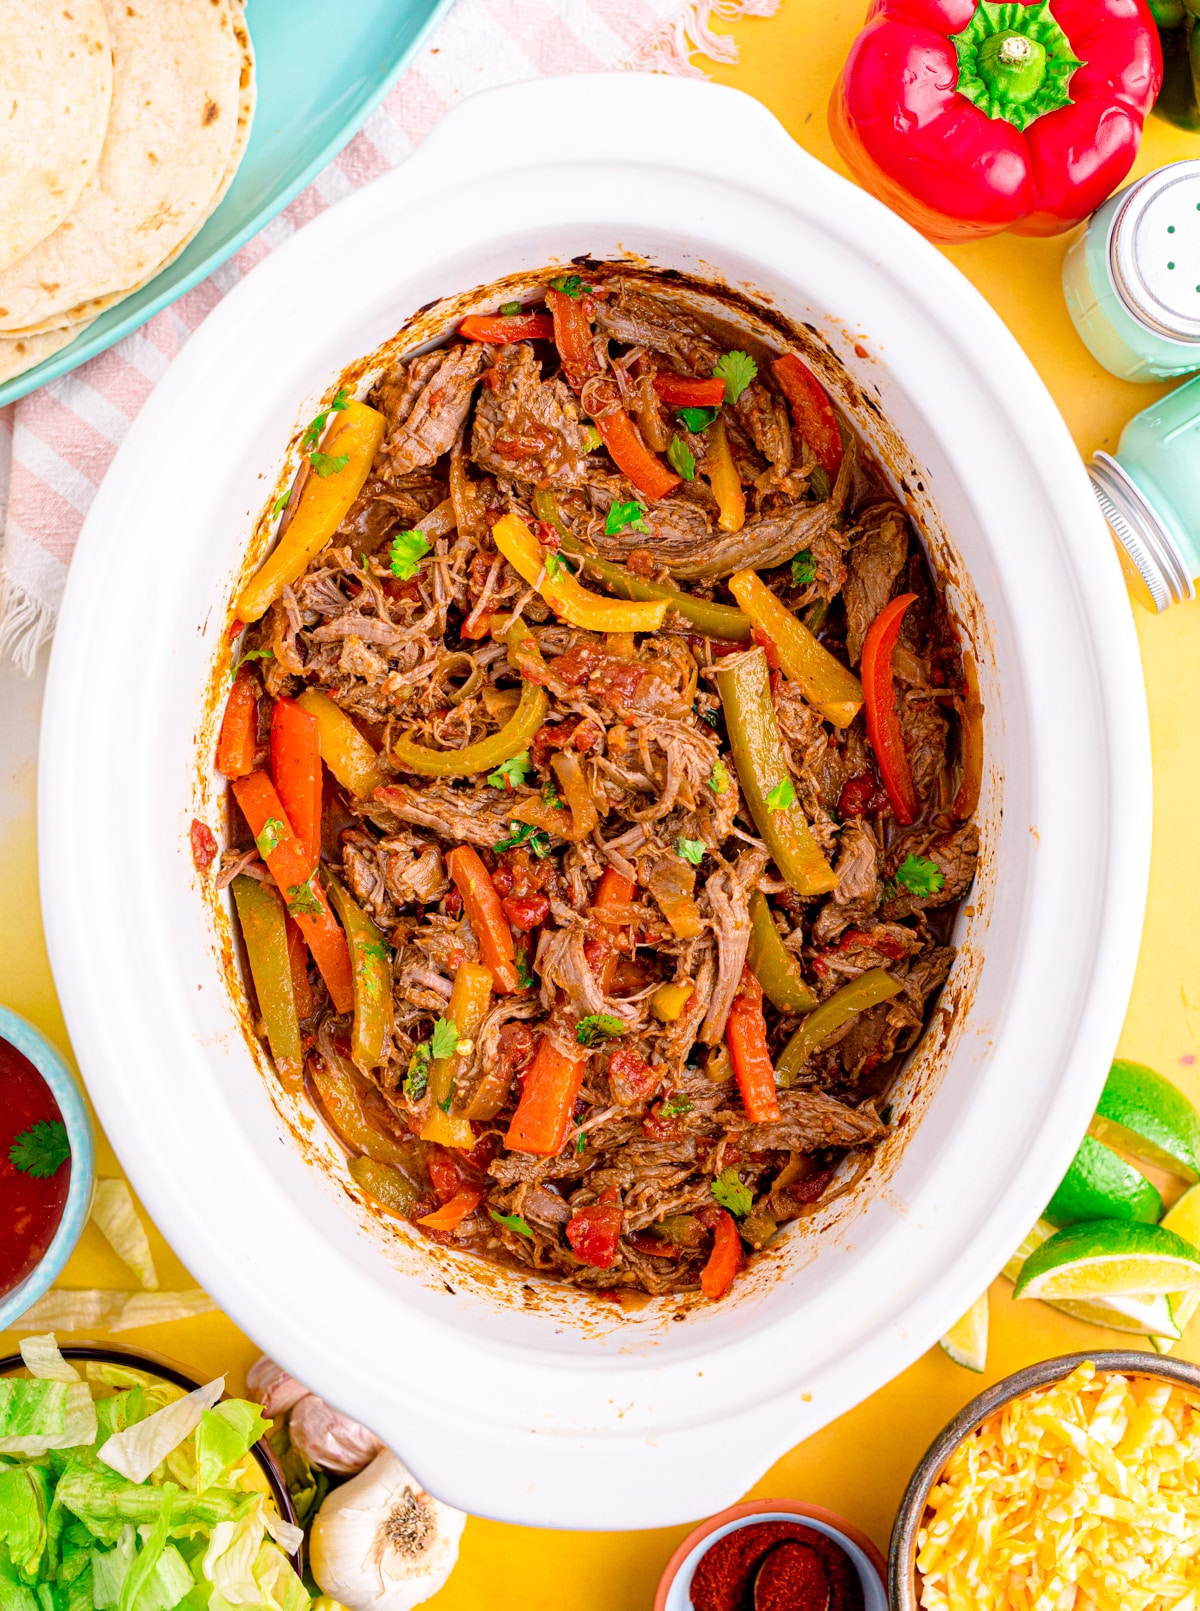 Shredded steak fajitas in a slow cooker with bell peppers.